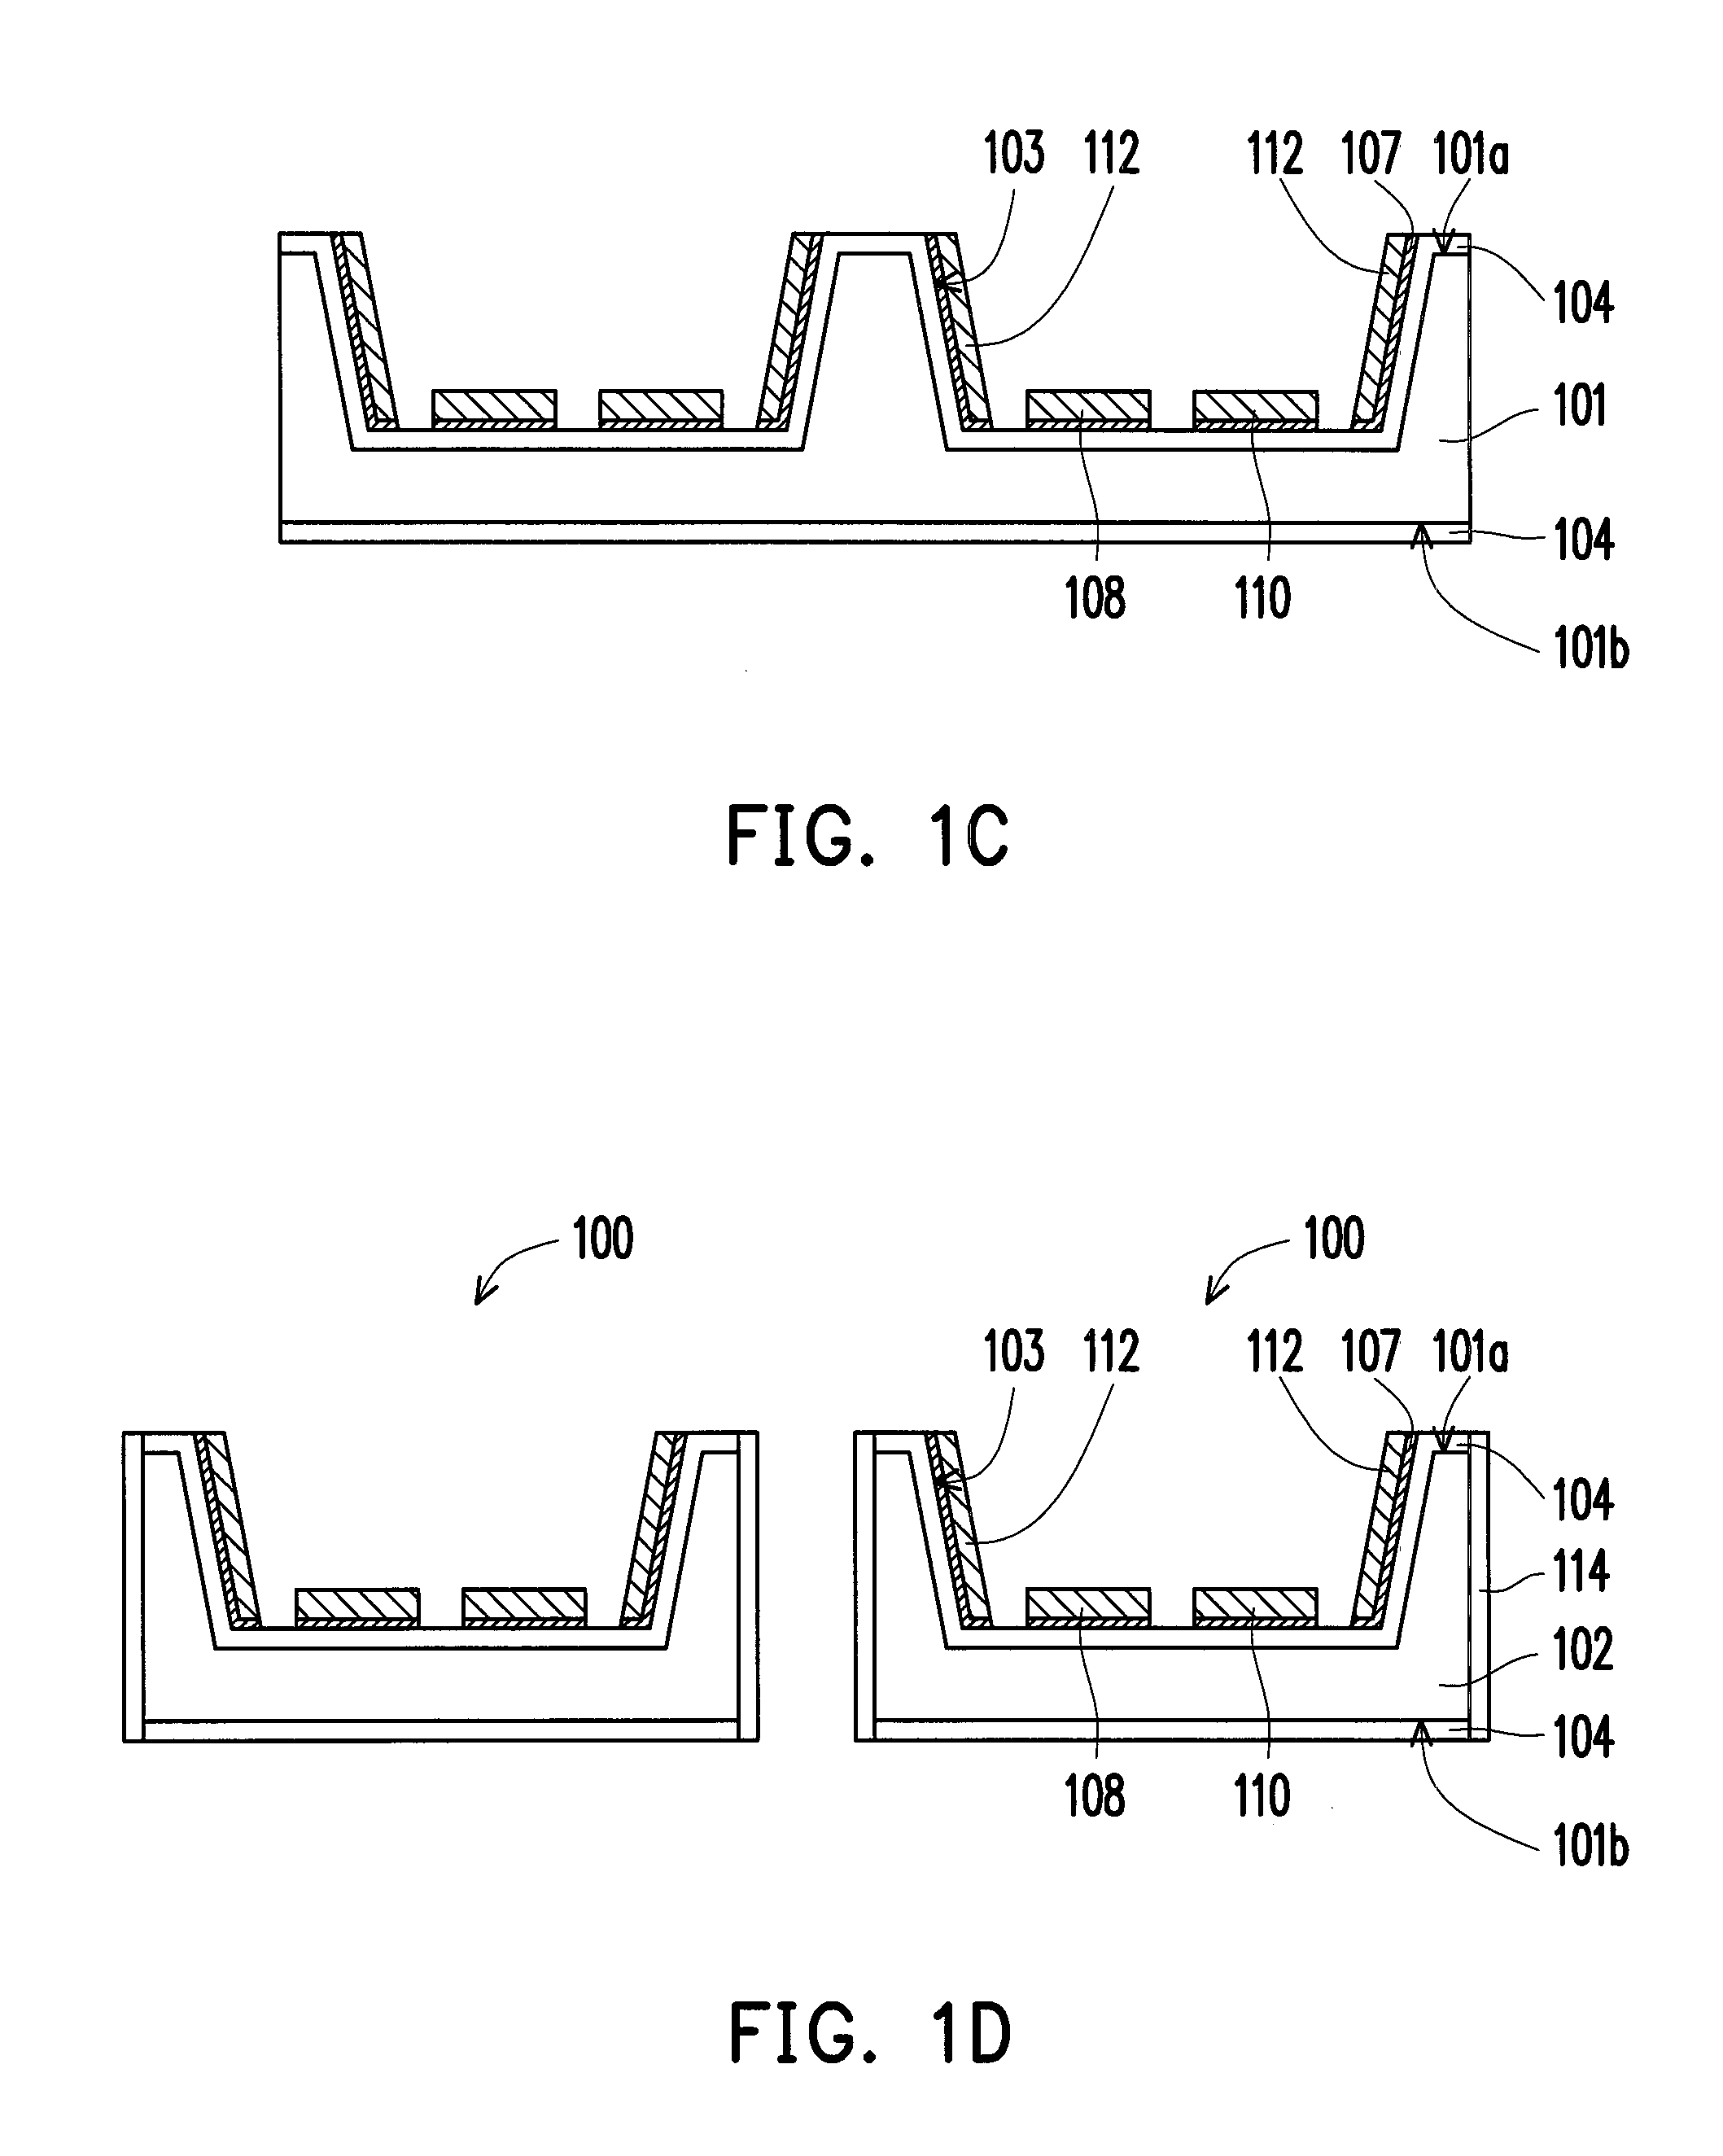 Silicon submount for light emitting diode and method of forming the same